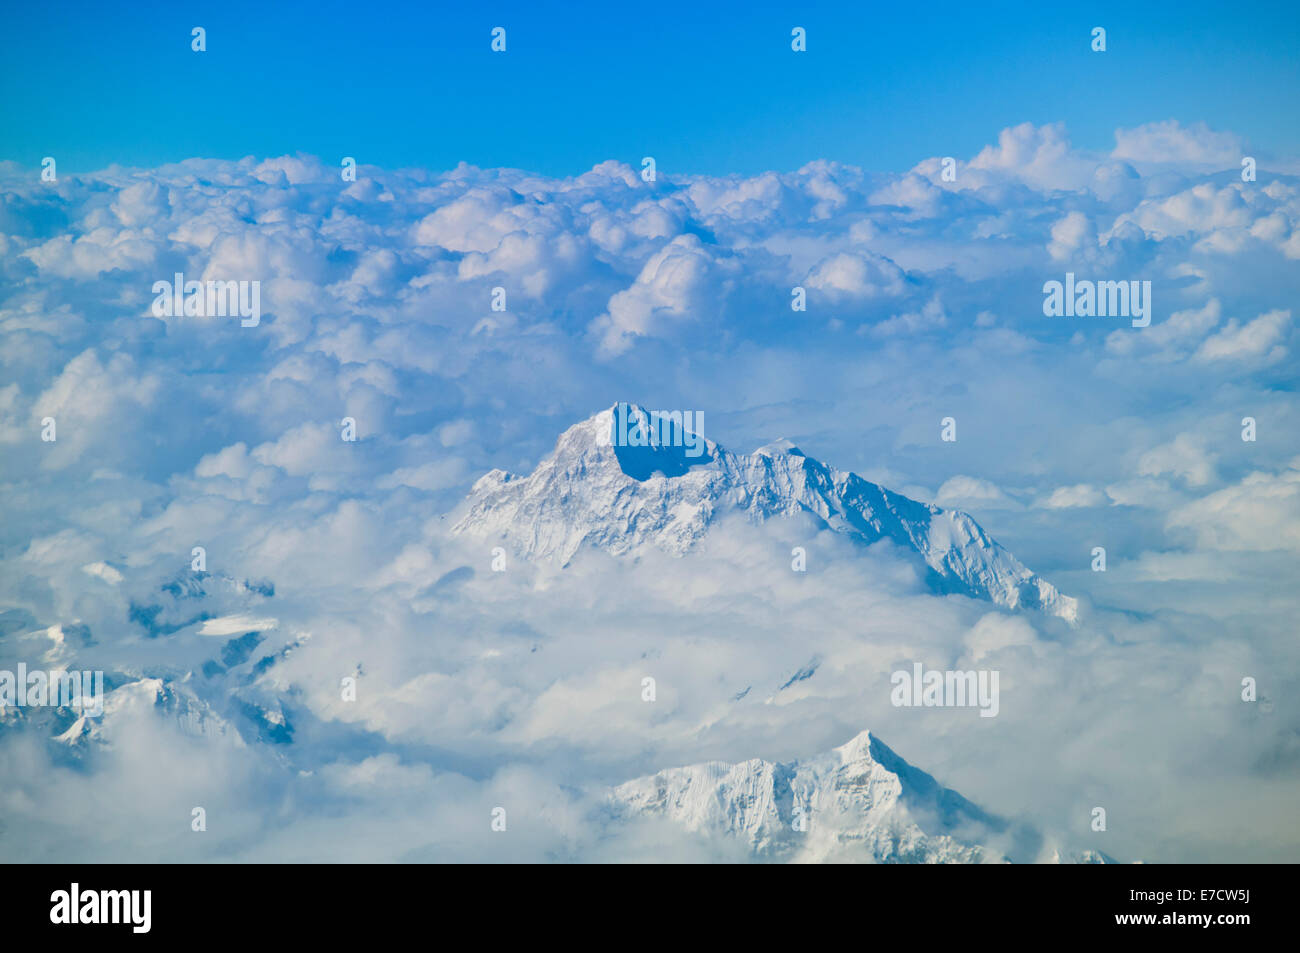 Views of Mount Everest (Highest Peek) and Himalayas through Clouds on ...